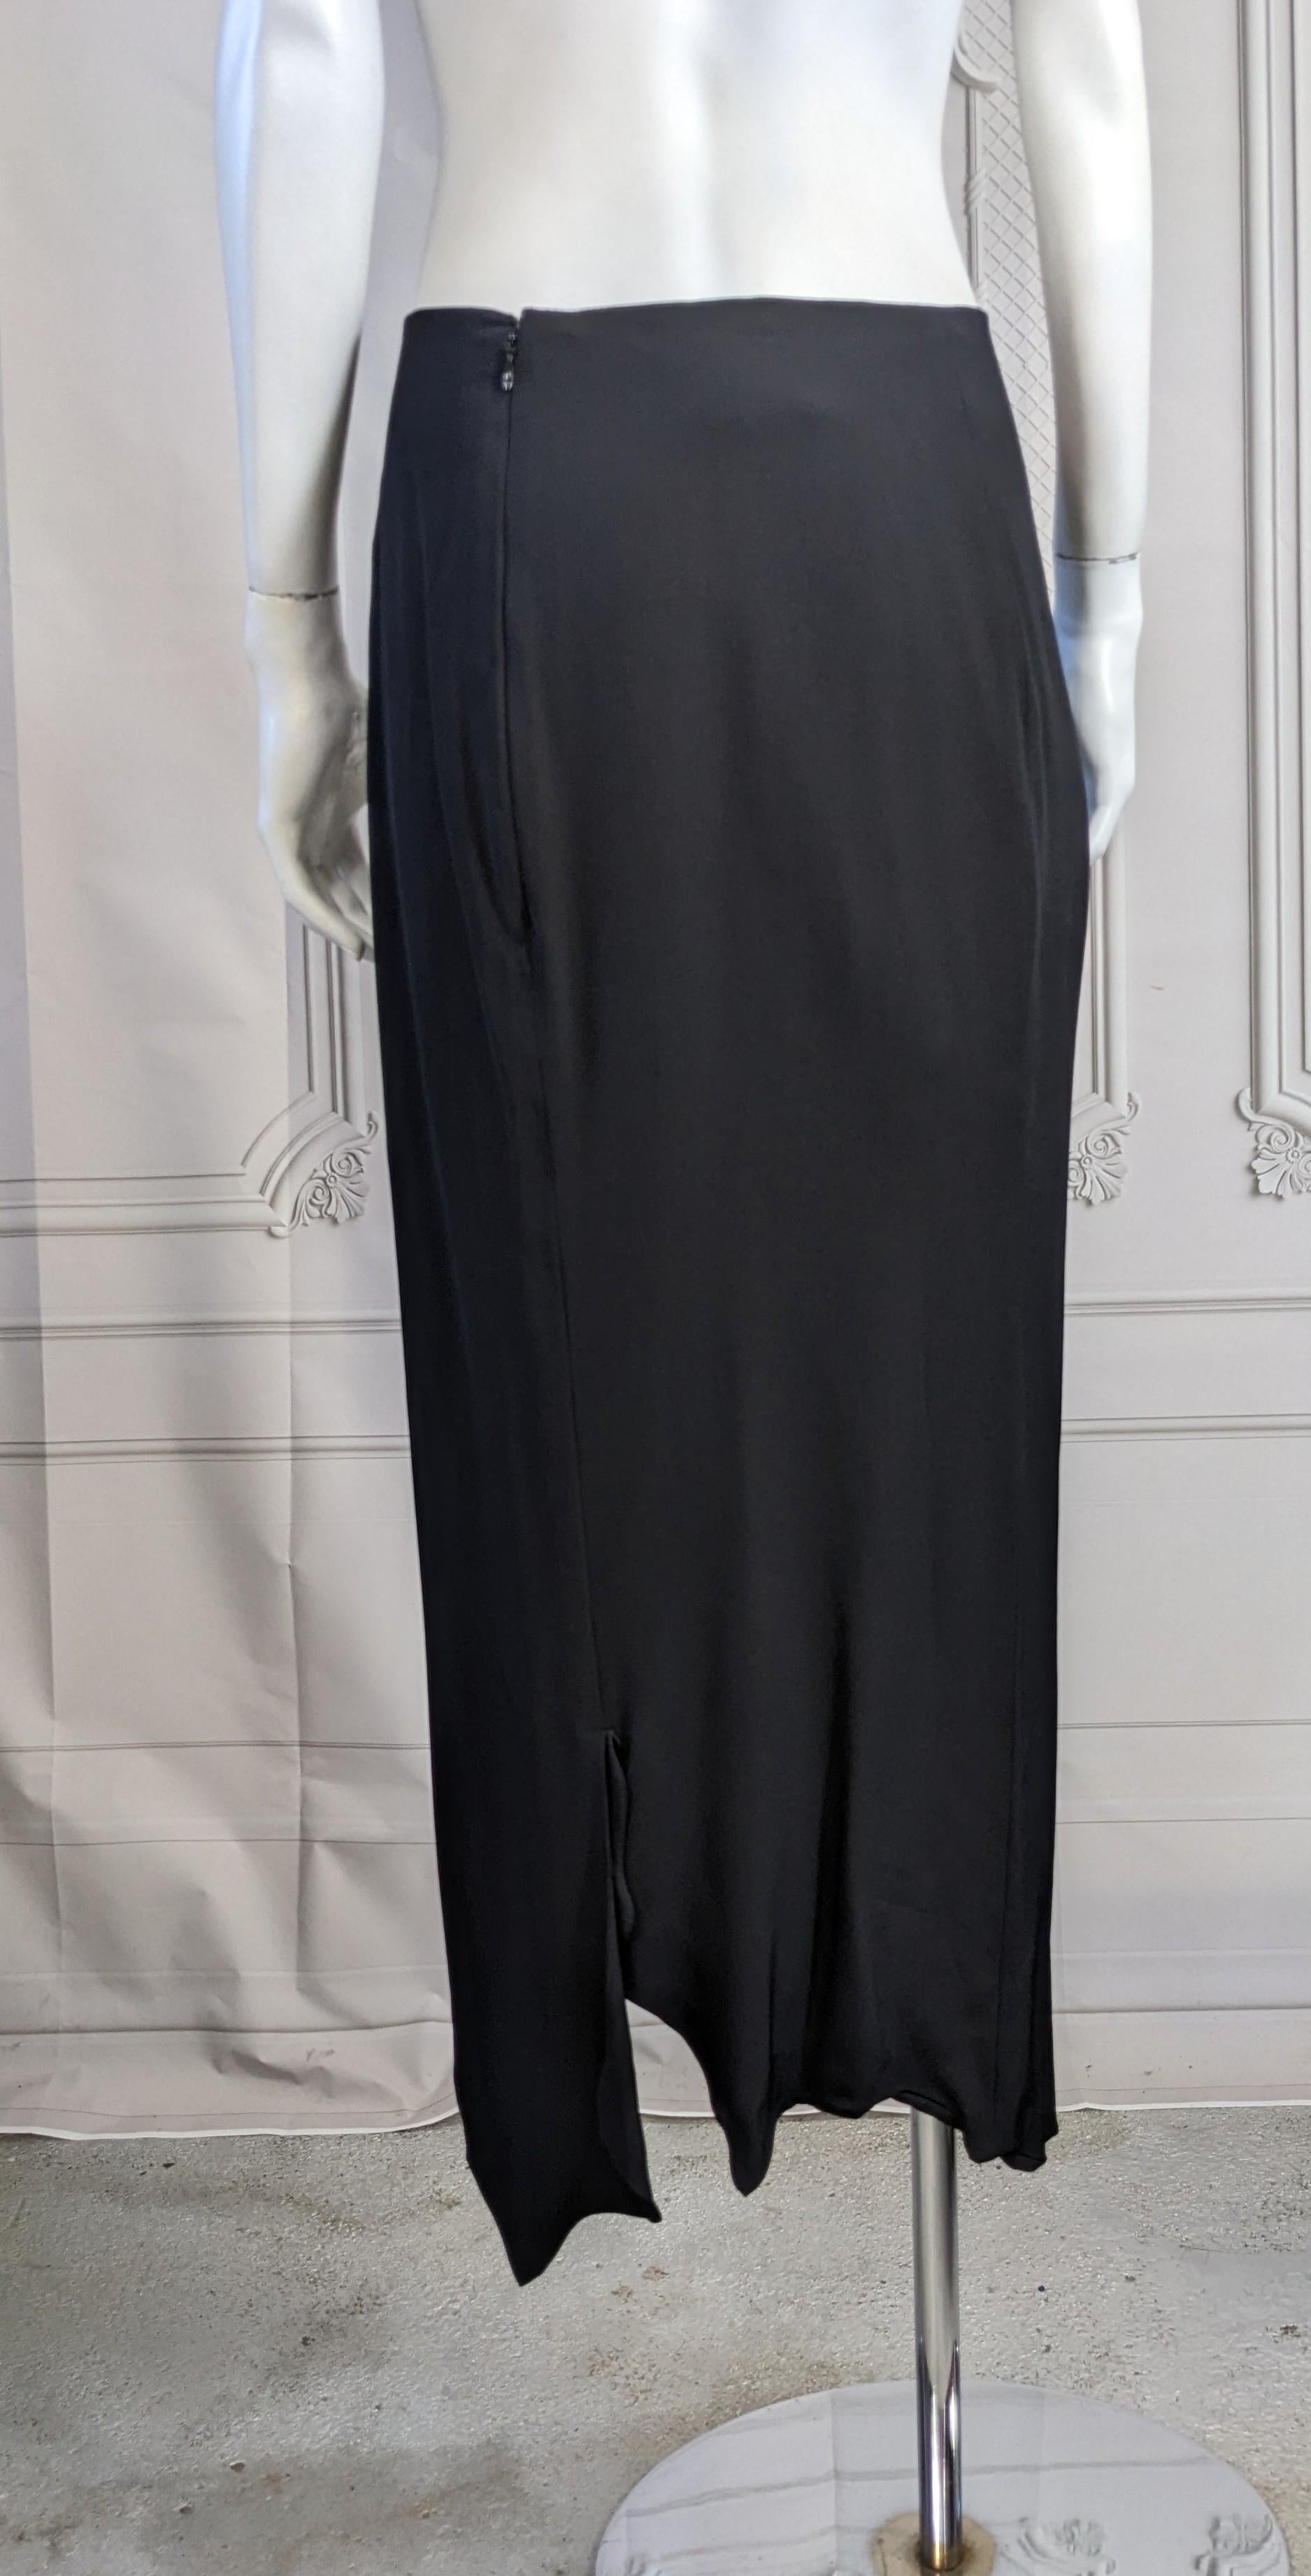 Yohji Yamamoto Ragged Hem Silk Skirt  In Excellent Condition For Sale In New York, NY